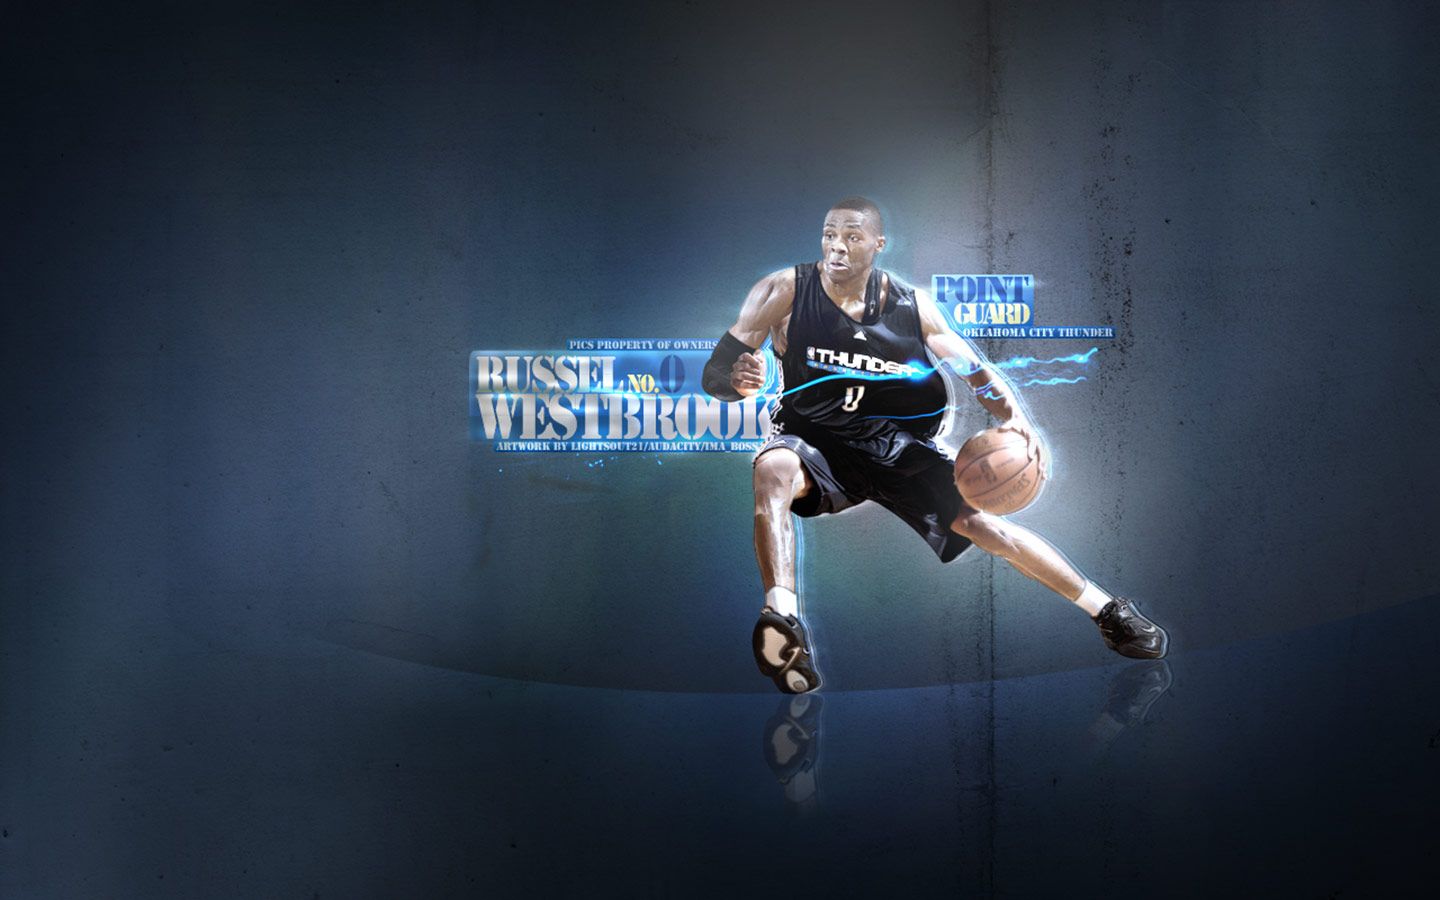 Russell Westbrook Thunder Wallpaper | Basketball Wallpapers at ...